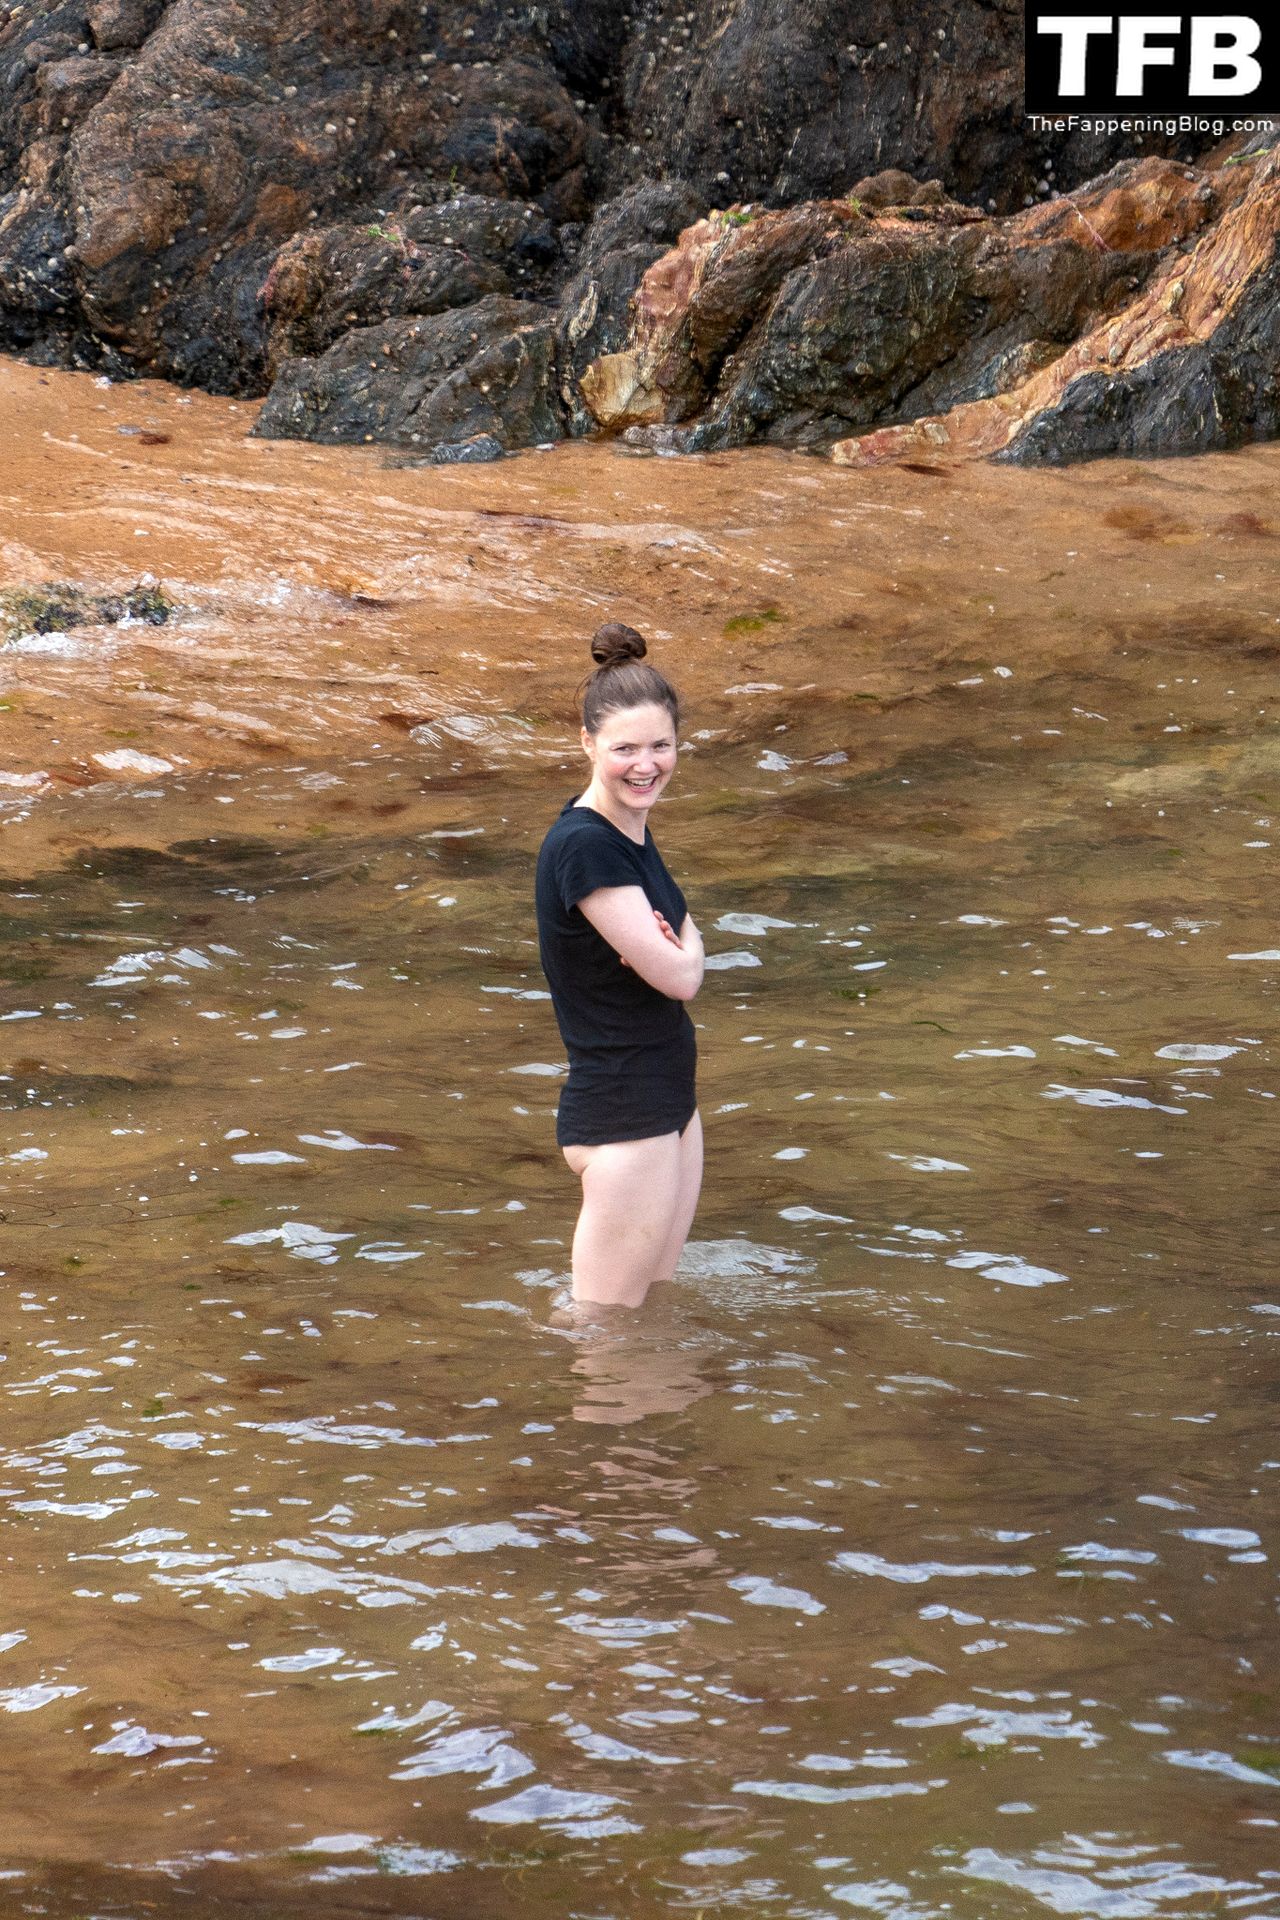 Holliday Grainger Takes a Dip in the Water During a Trip to the Beach in Devon (10 Photos)